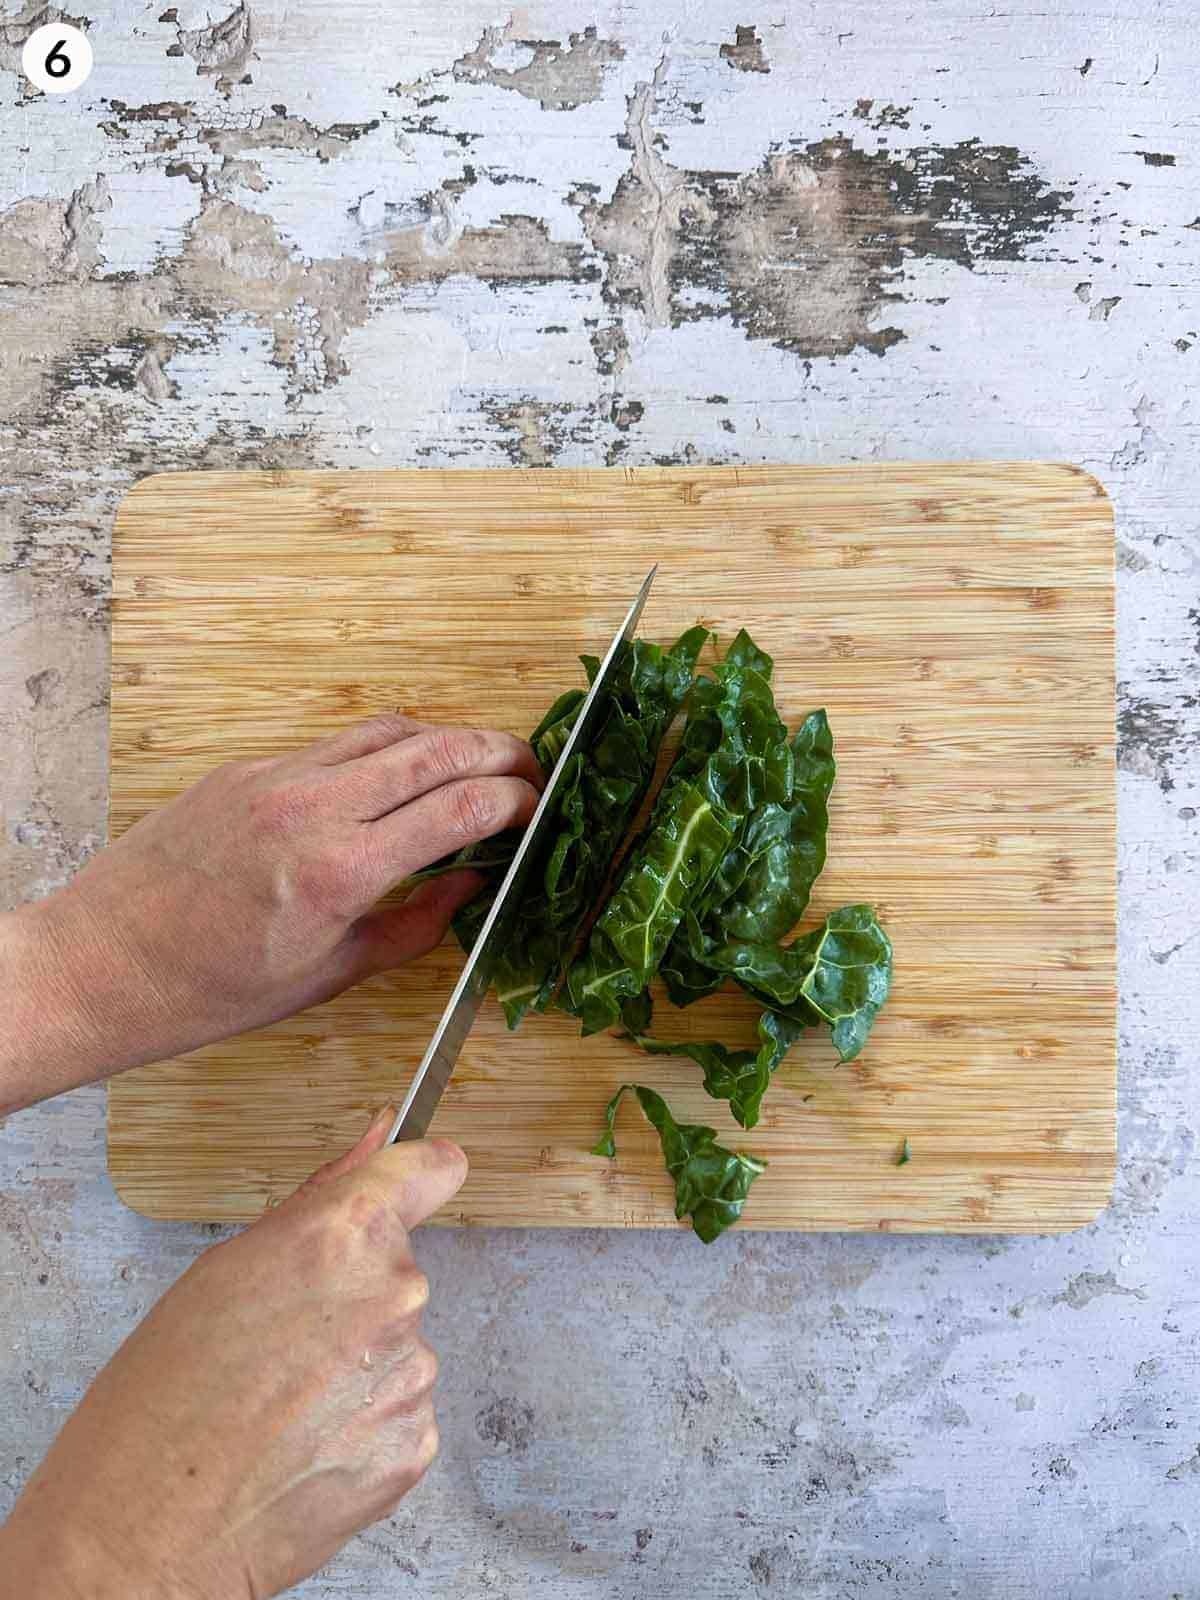 Chopping silverbeet with a knife on a wooden chopping board